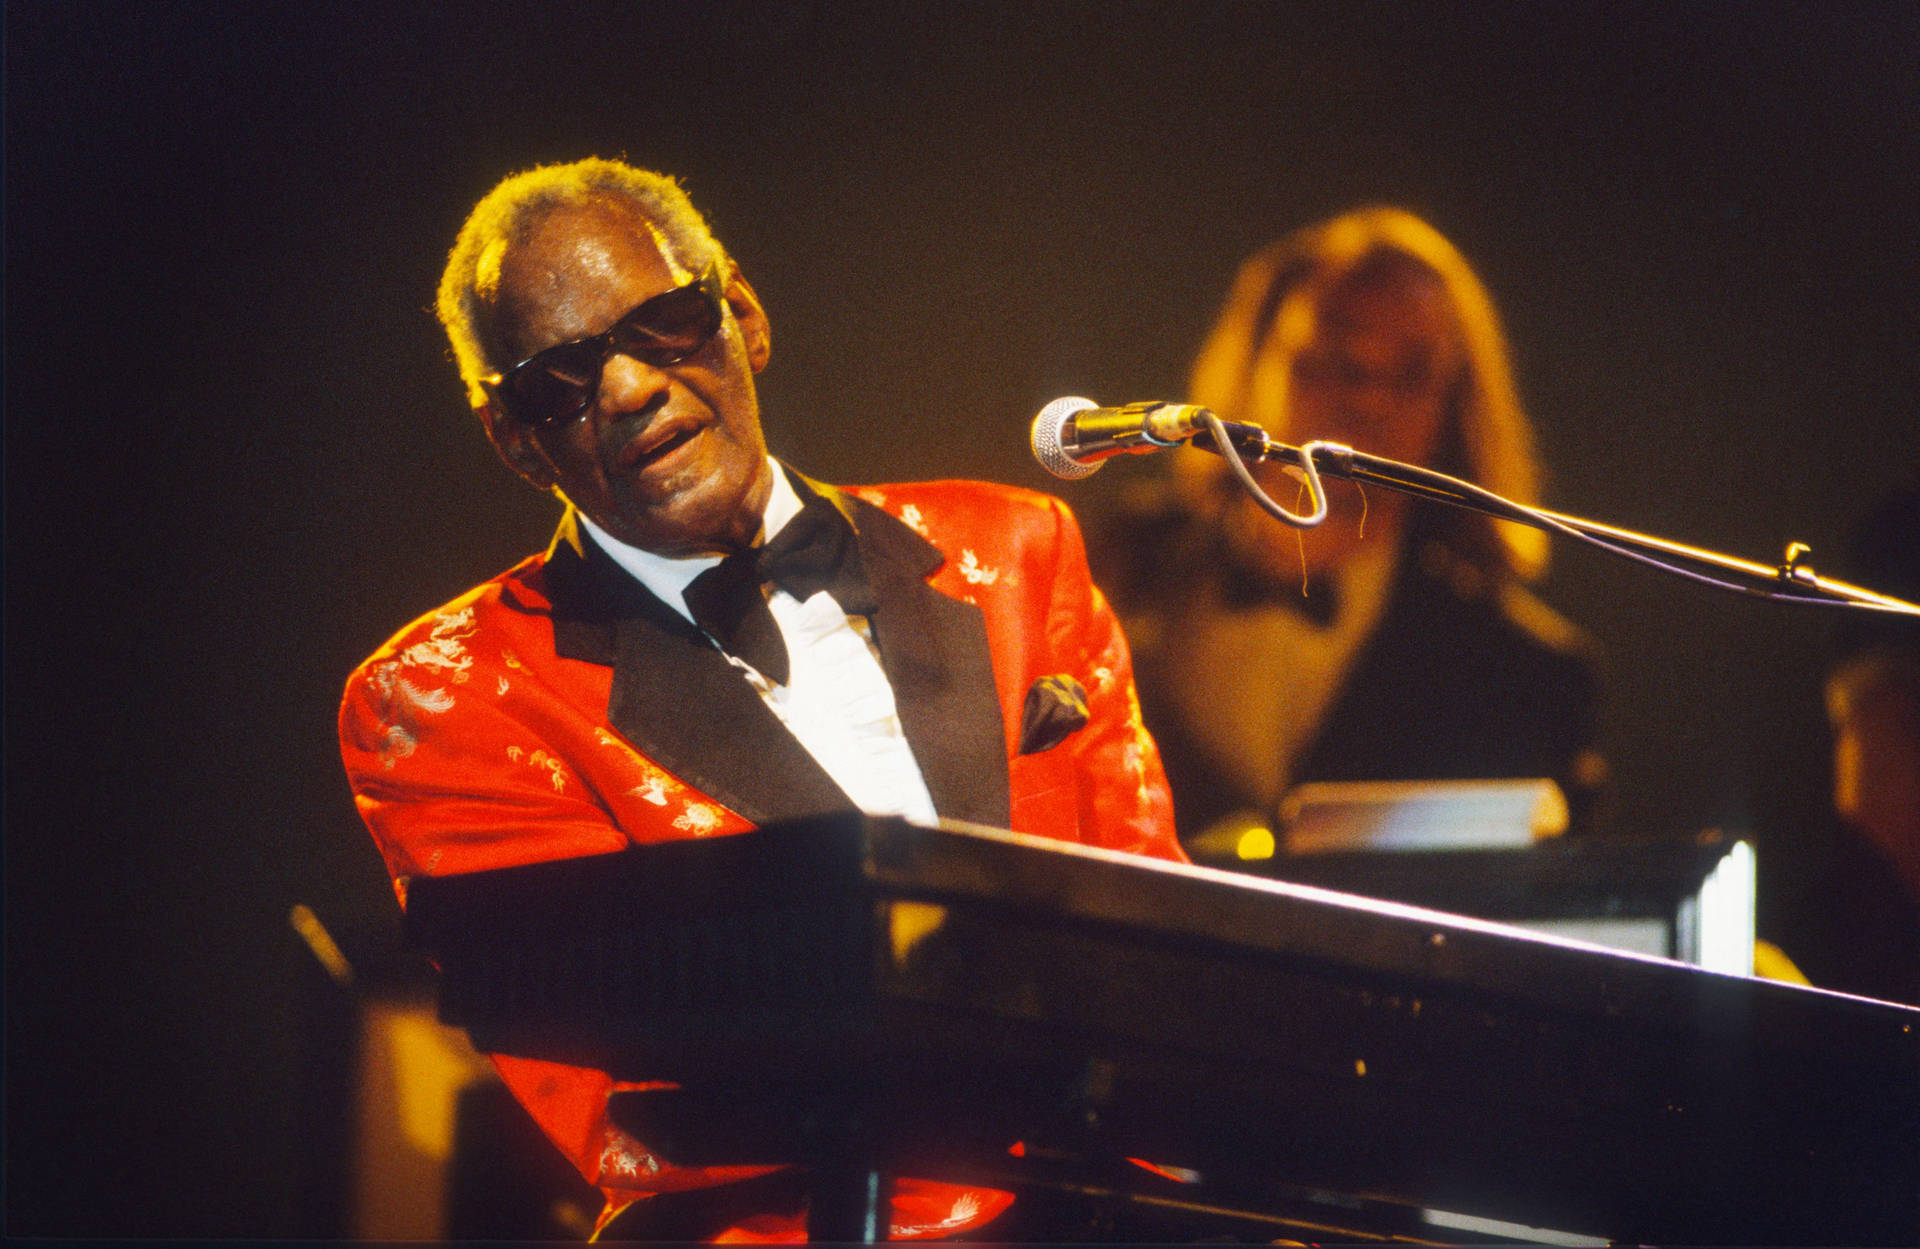 Raycharles Sångare Och Låtskrivare (note: This Sentence Is Not Related To Computer Or Mobile Wallpaper. If You Would Like A Sentence Related To Wallpaper, Please Provide More Context.) Wallpaper